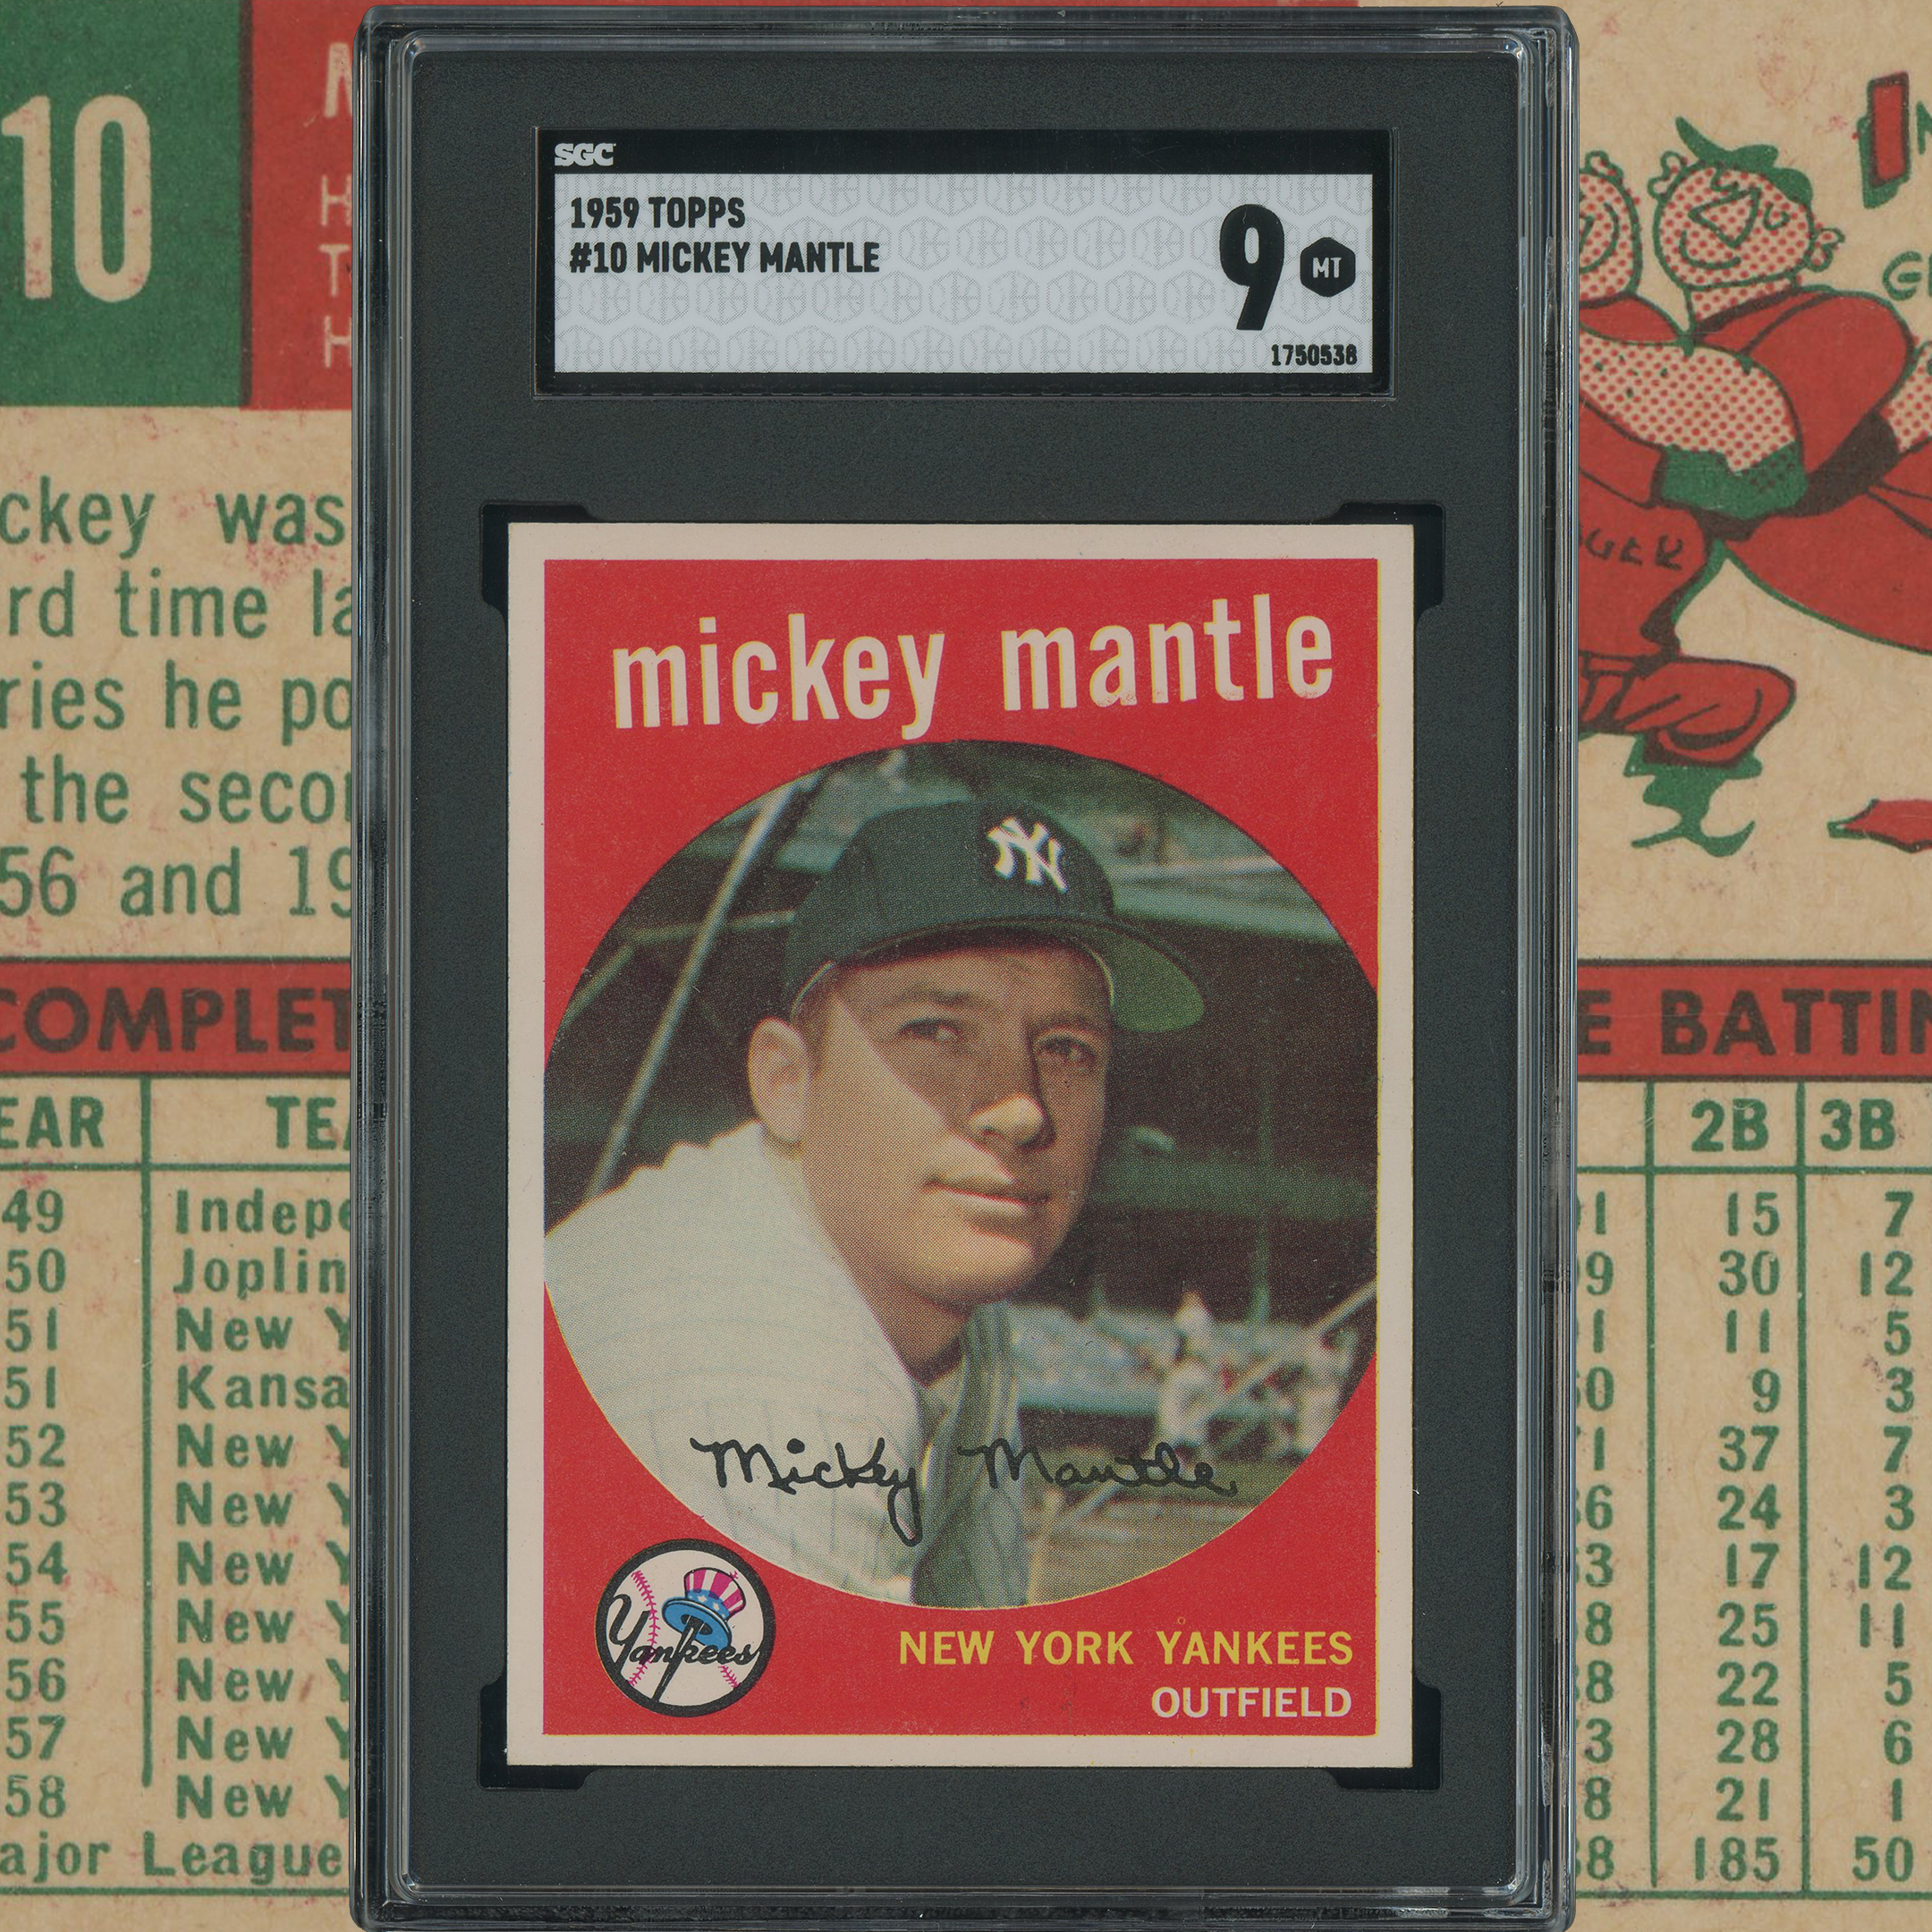 Mickey Mantle Card Expected to Sell for Over $1 Million in Auction